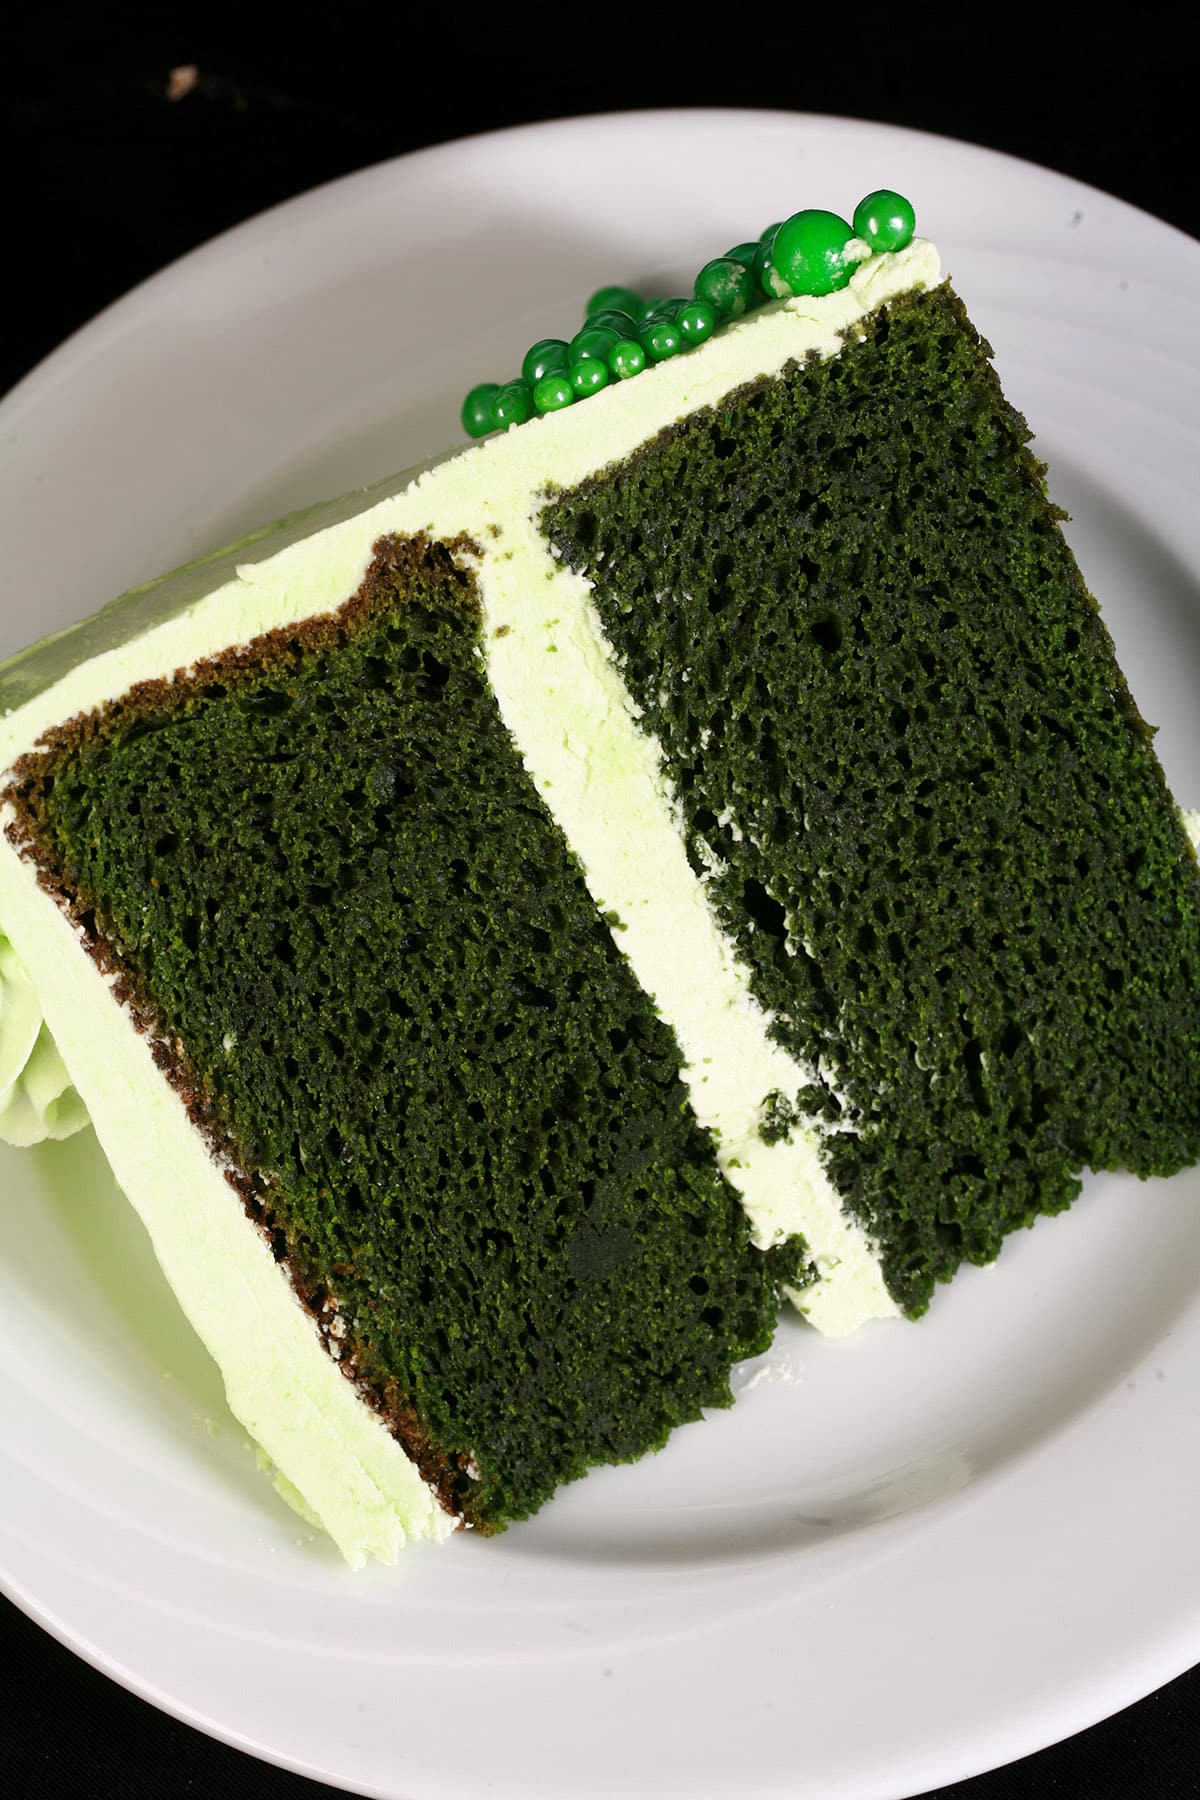 A slice of green velvet cake with light green frosting on a white plate.